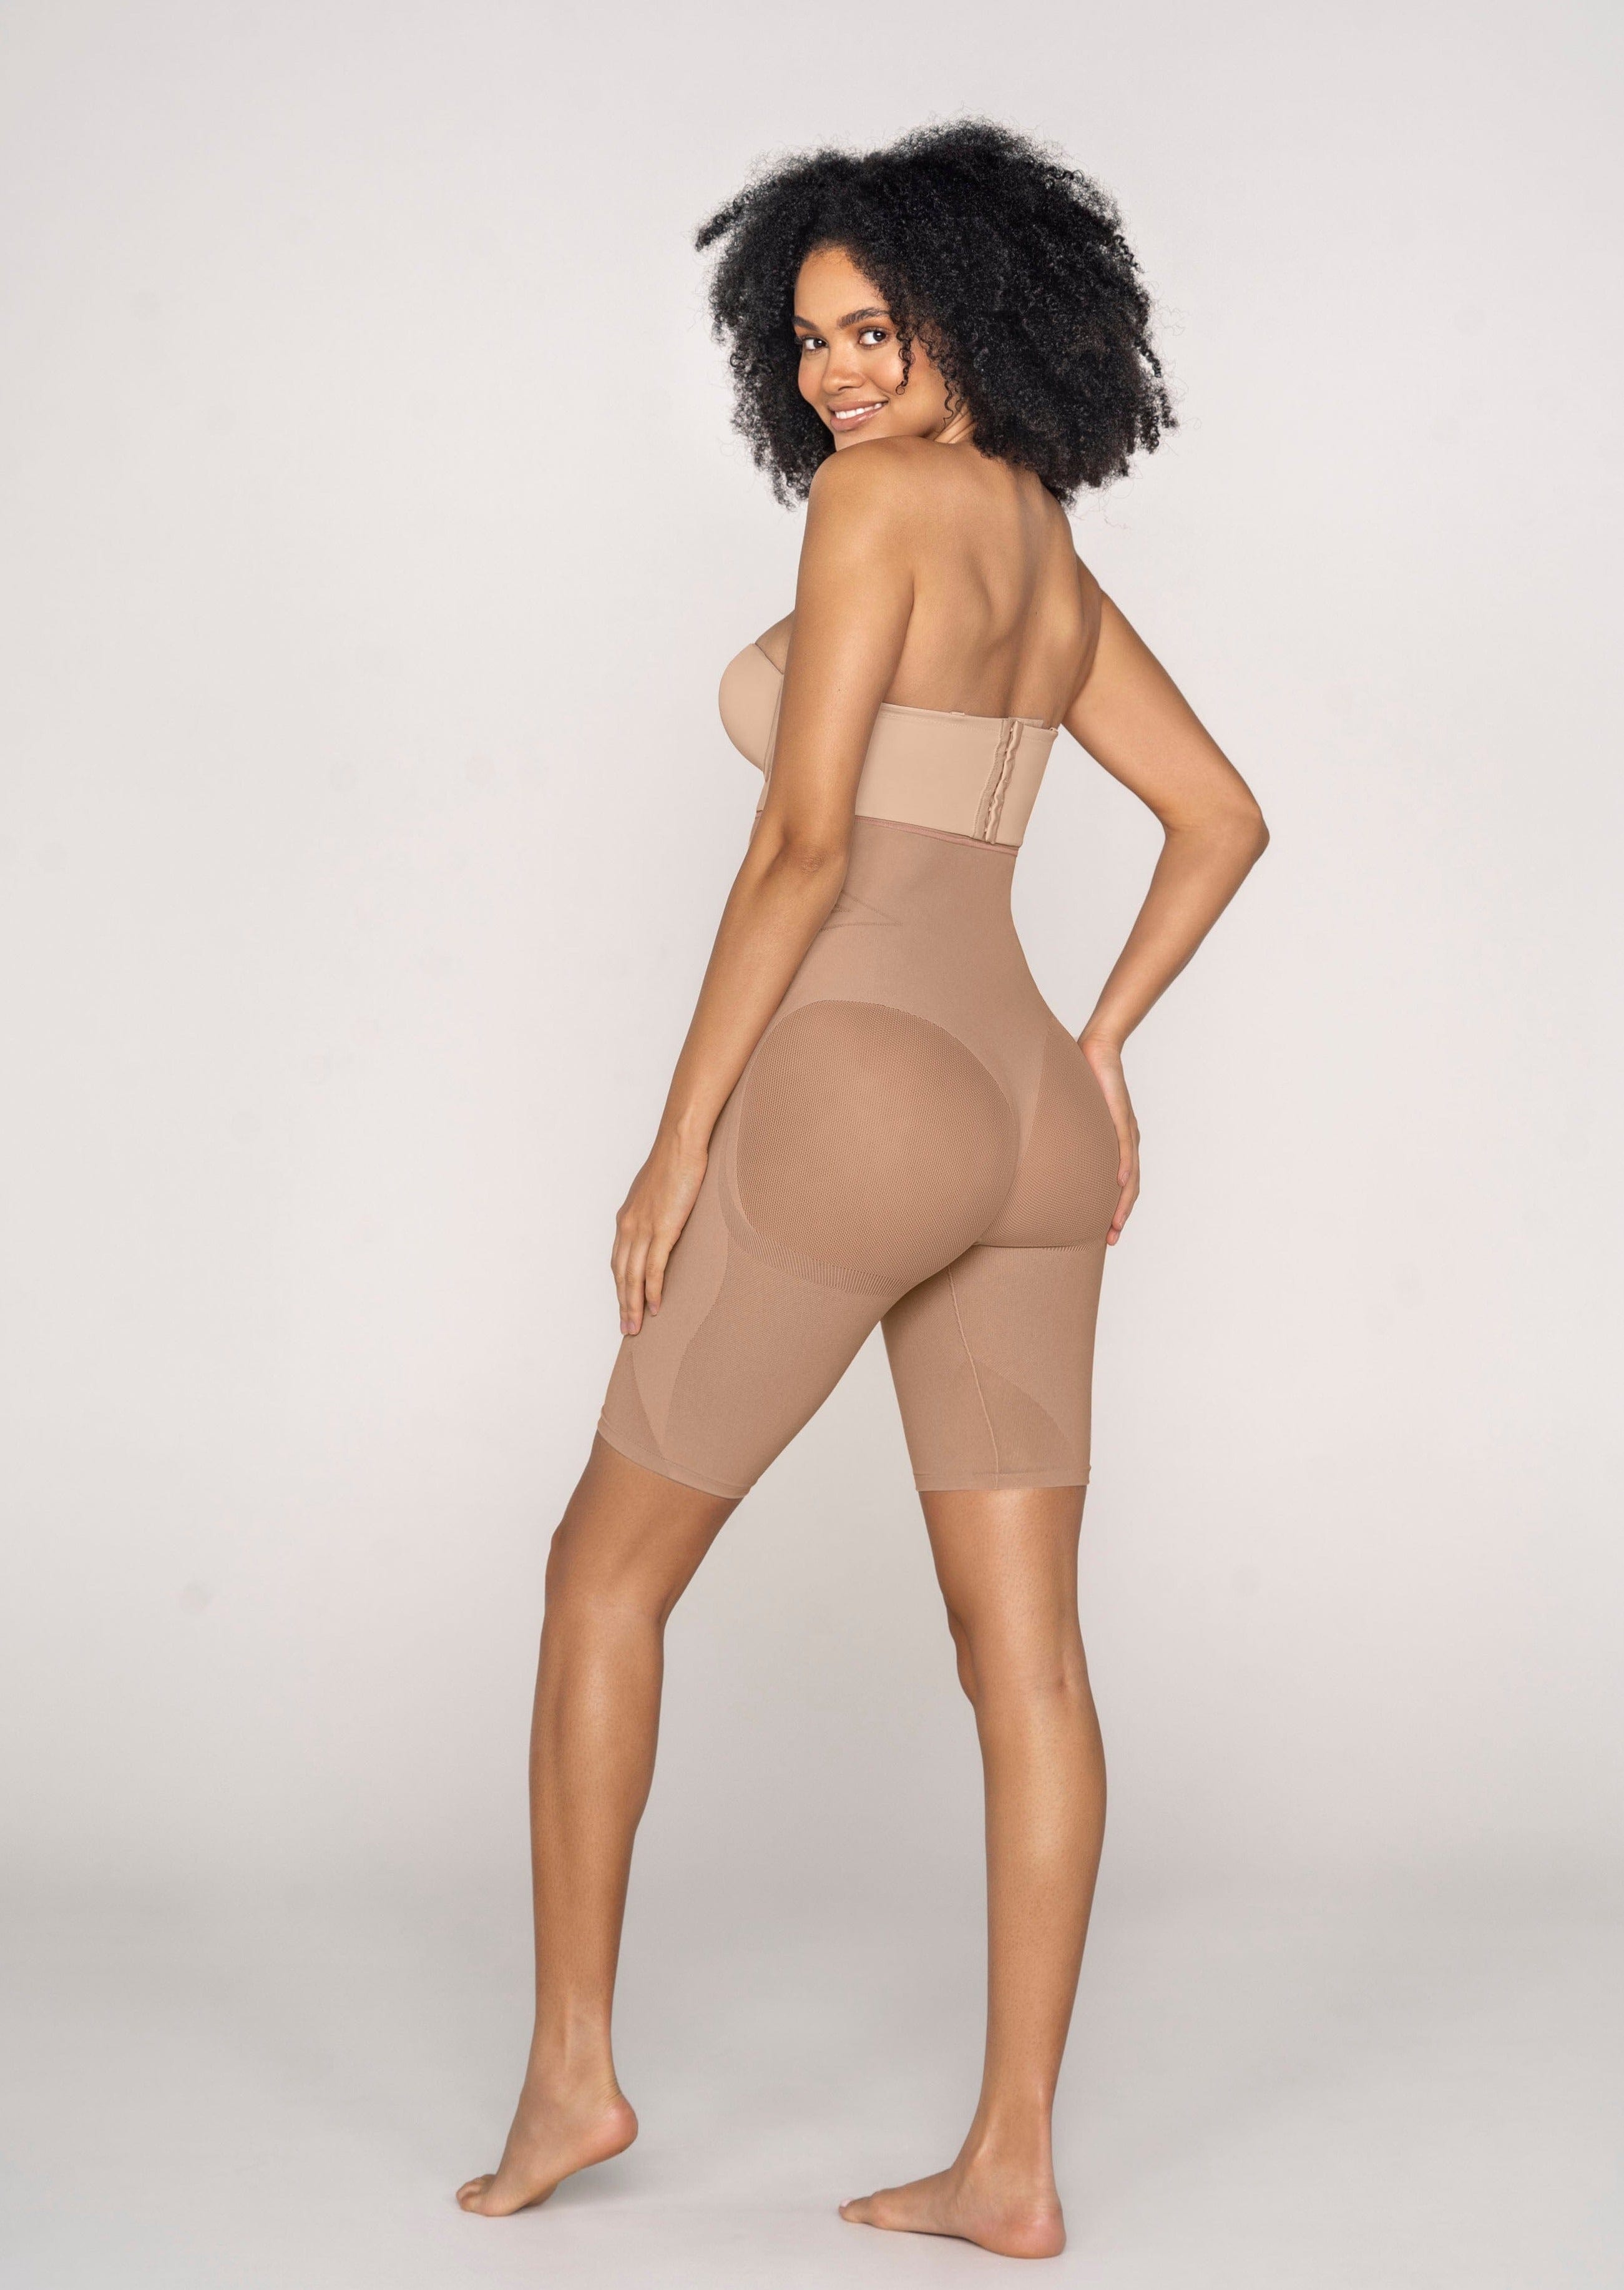 Invisible Extra High-Waisted Shaper Short